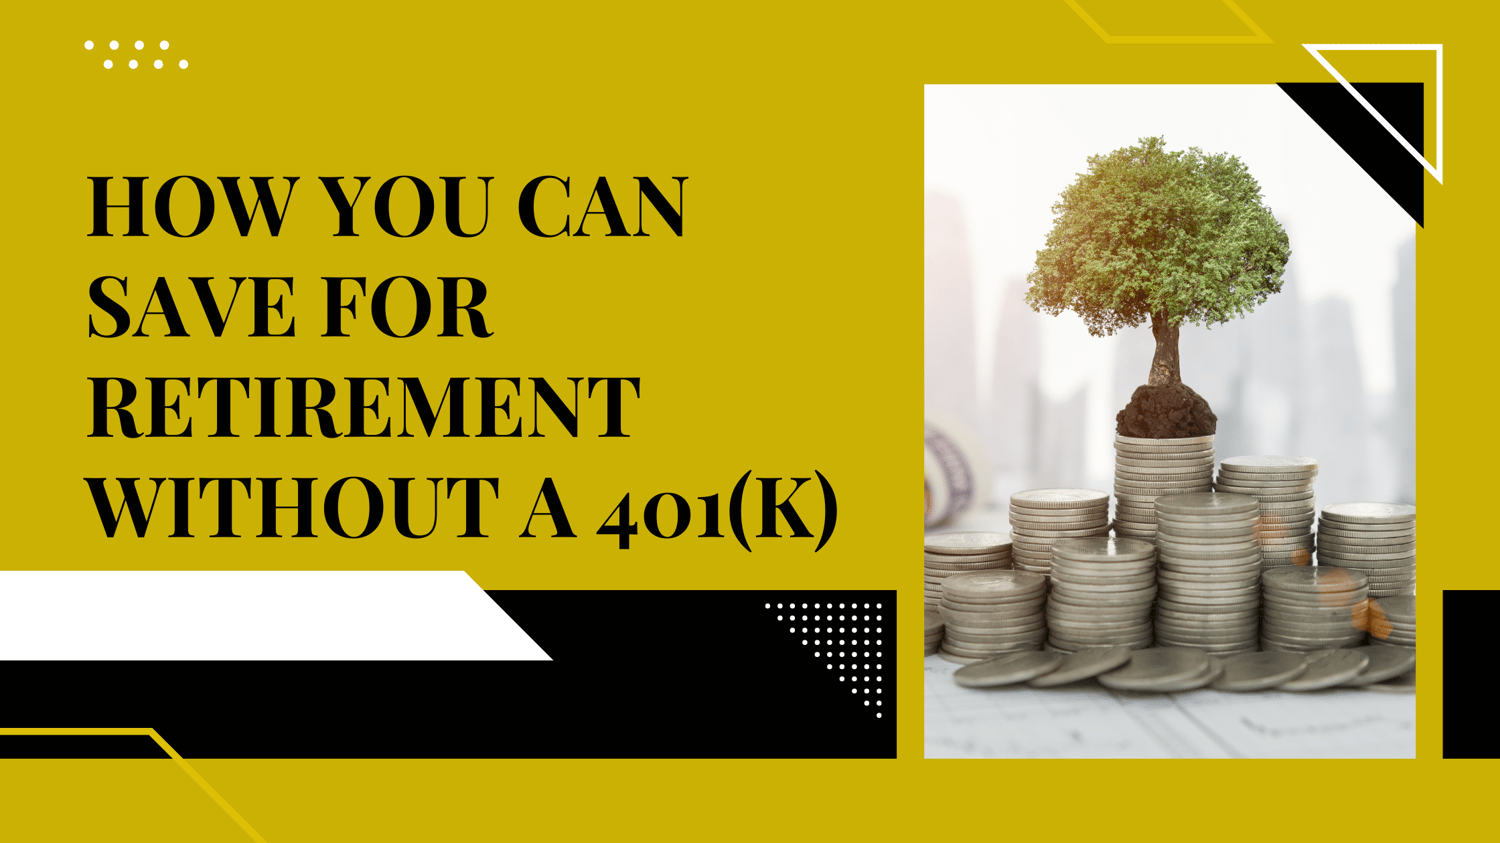 HOW YOU CAN SAVE FOR RETIREMENT WITHOUT A 401(K)